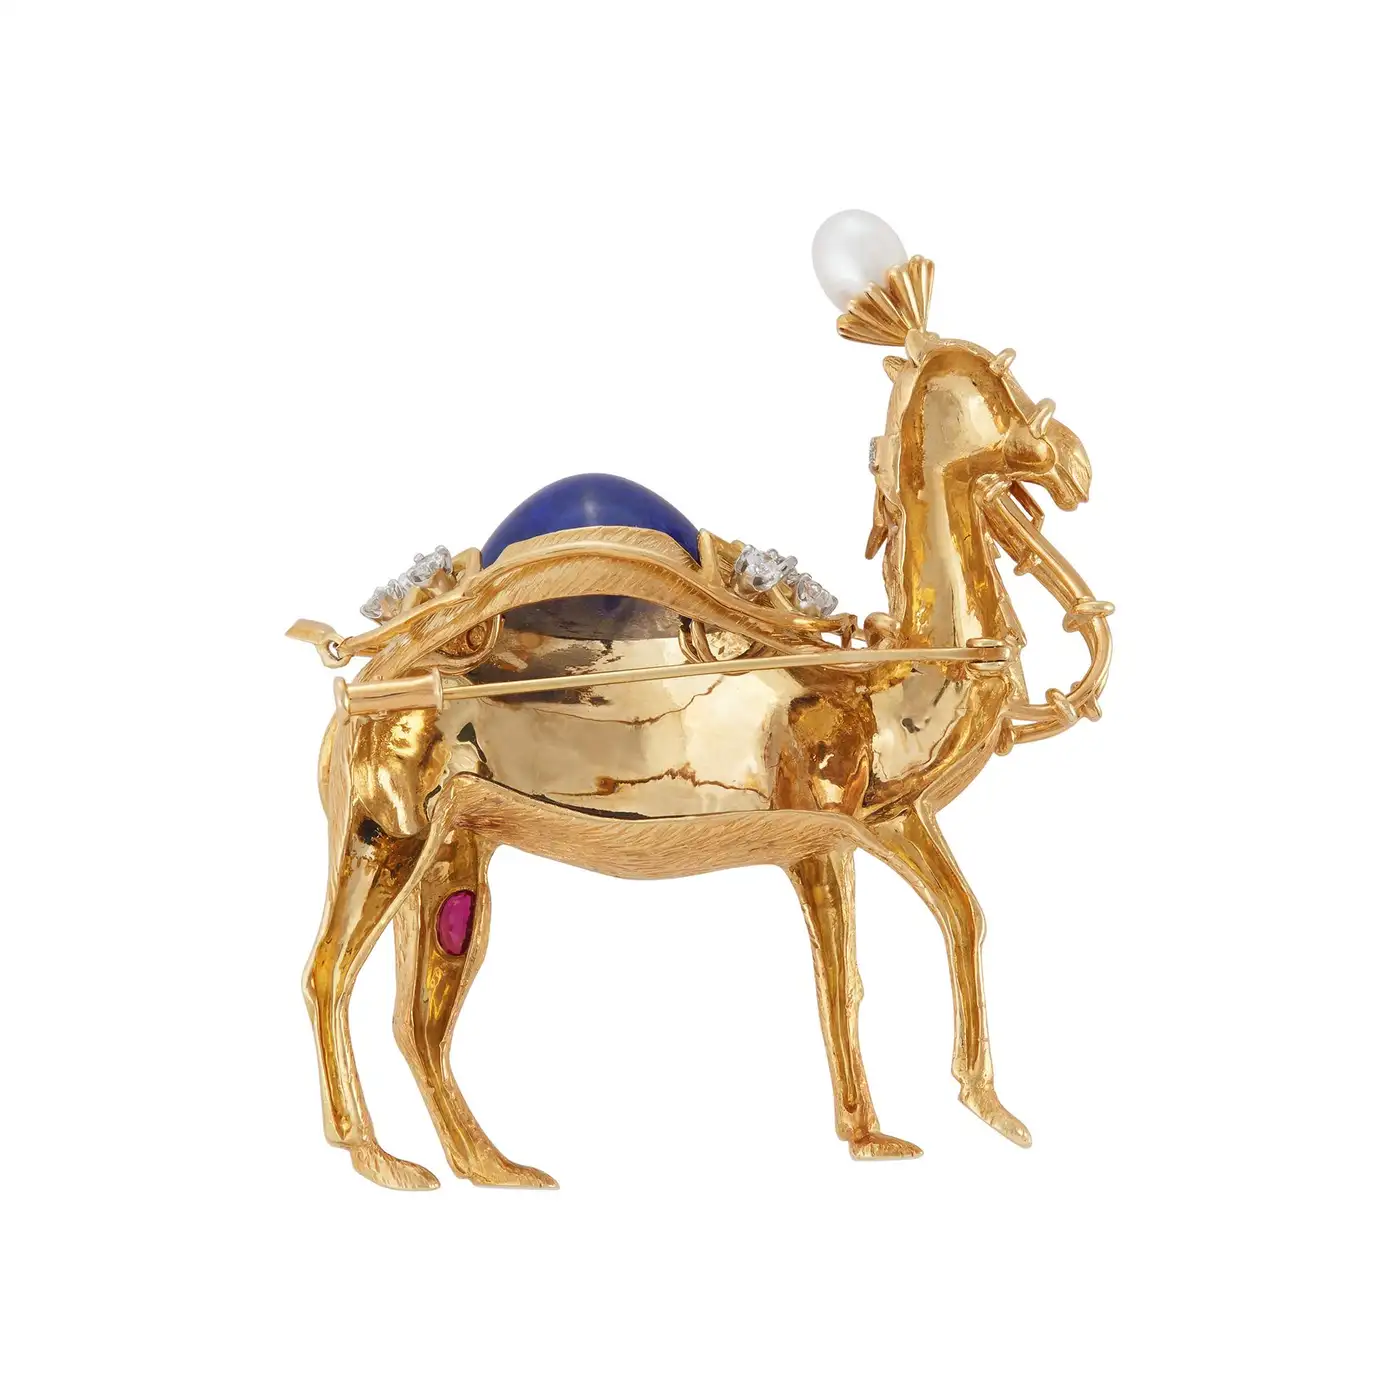 Diamond-and-Lapis-Lazuli-Camel-Brooch-Jean-Schlumberger-for-Tiffany-Co-5.webp